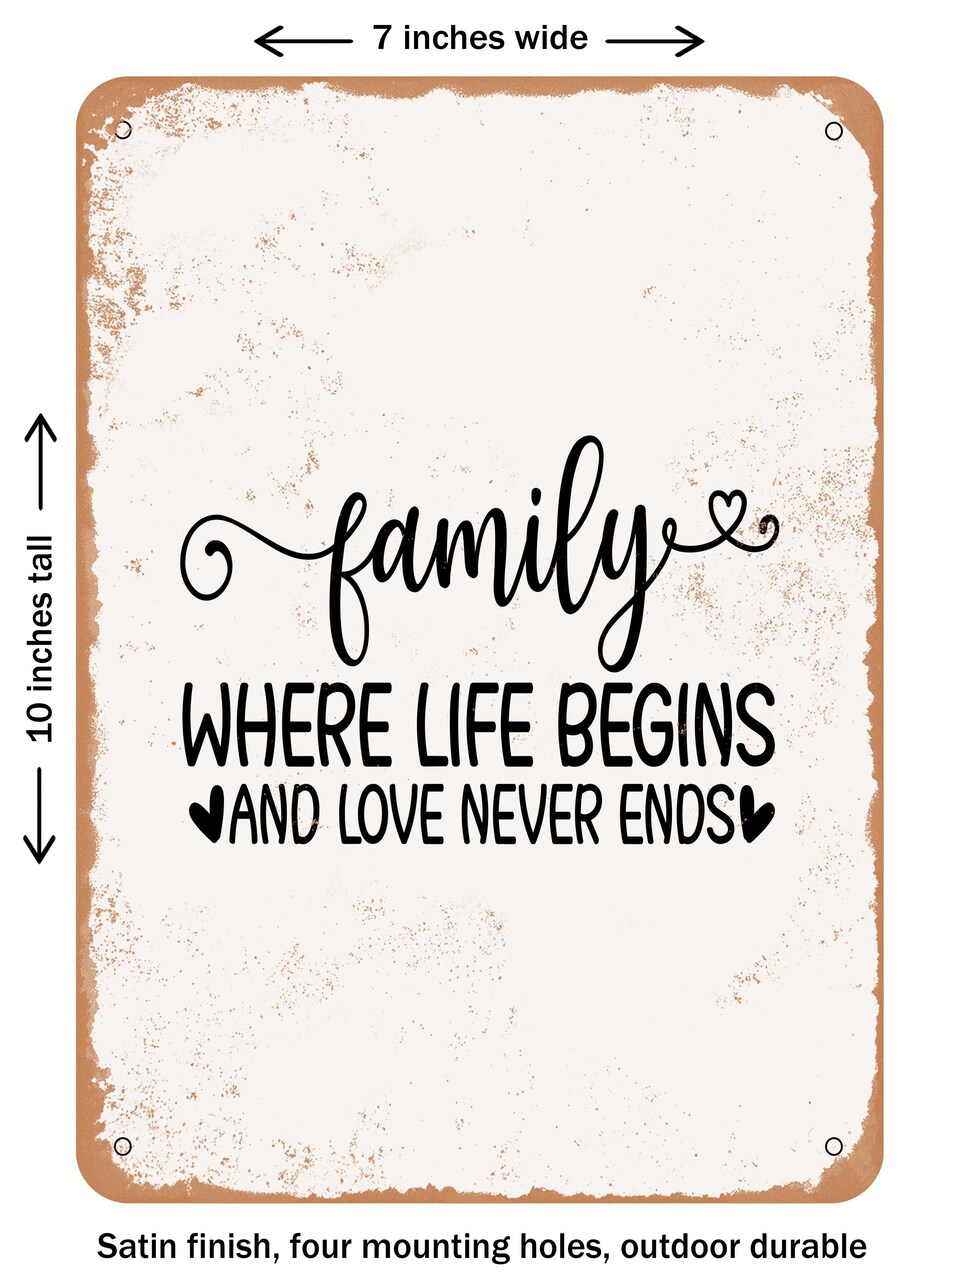 DECORATIVE METAL SIGN - Family Where Life Begins and Love Never Ends - 4  - Vintage Rusty Look